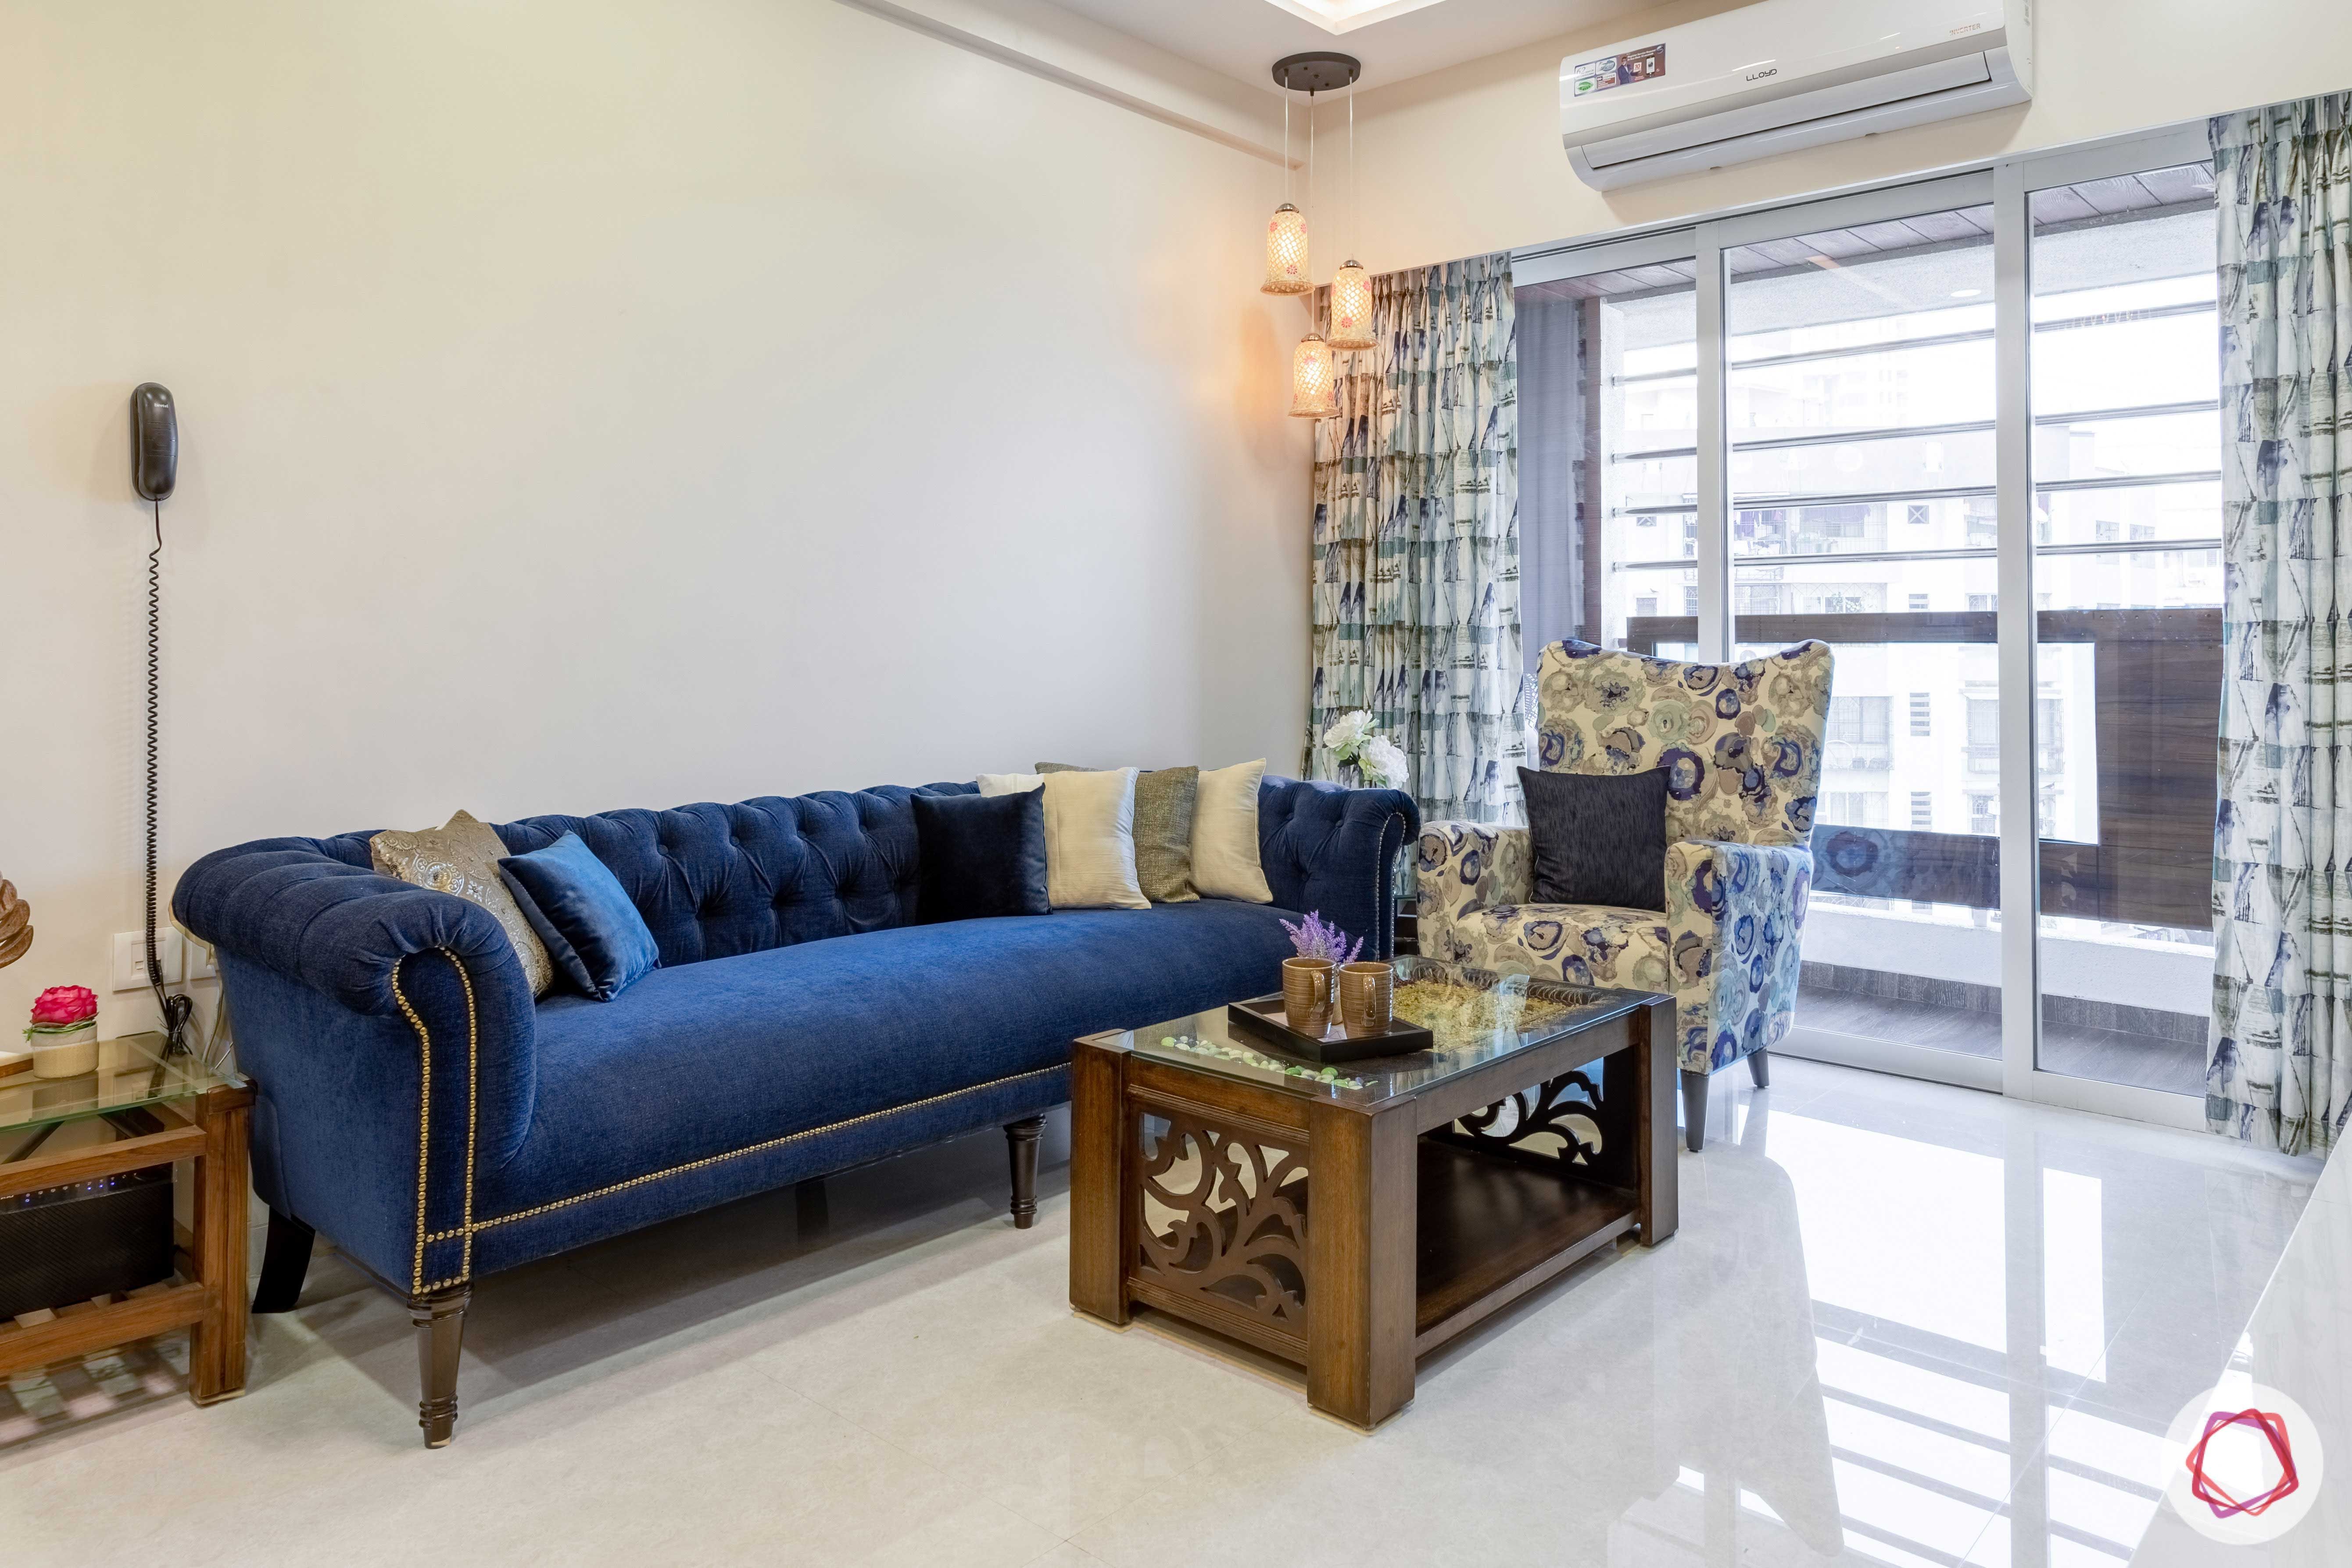 2 bhk flat interior-living room-blue sofa-printed accent chair-wooden centre table